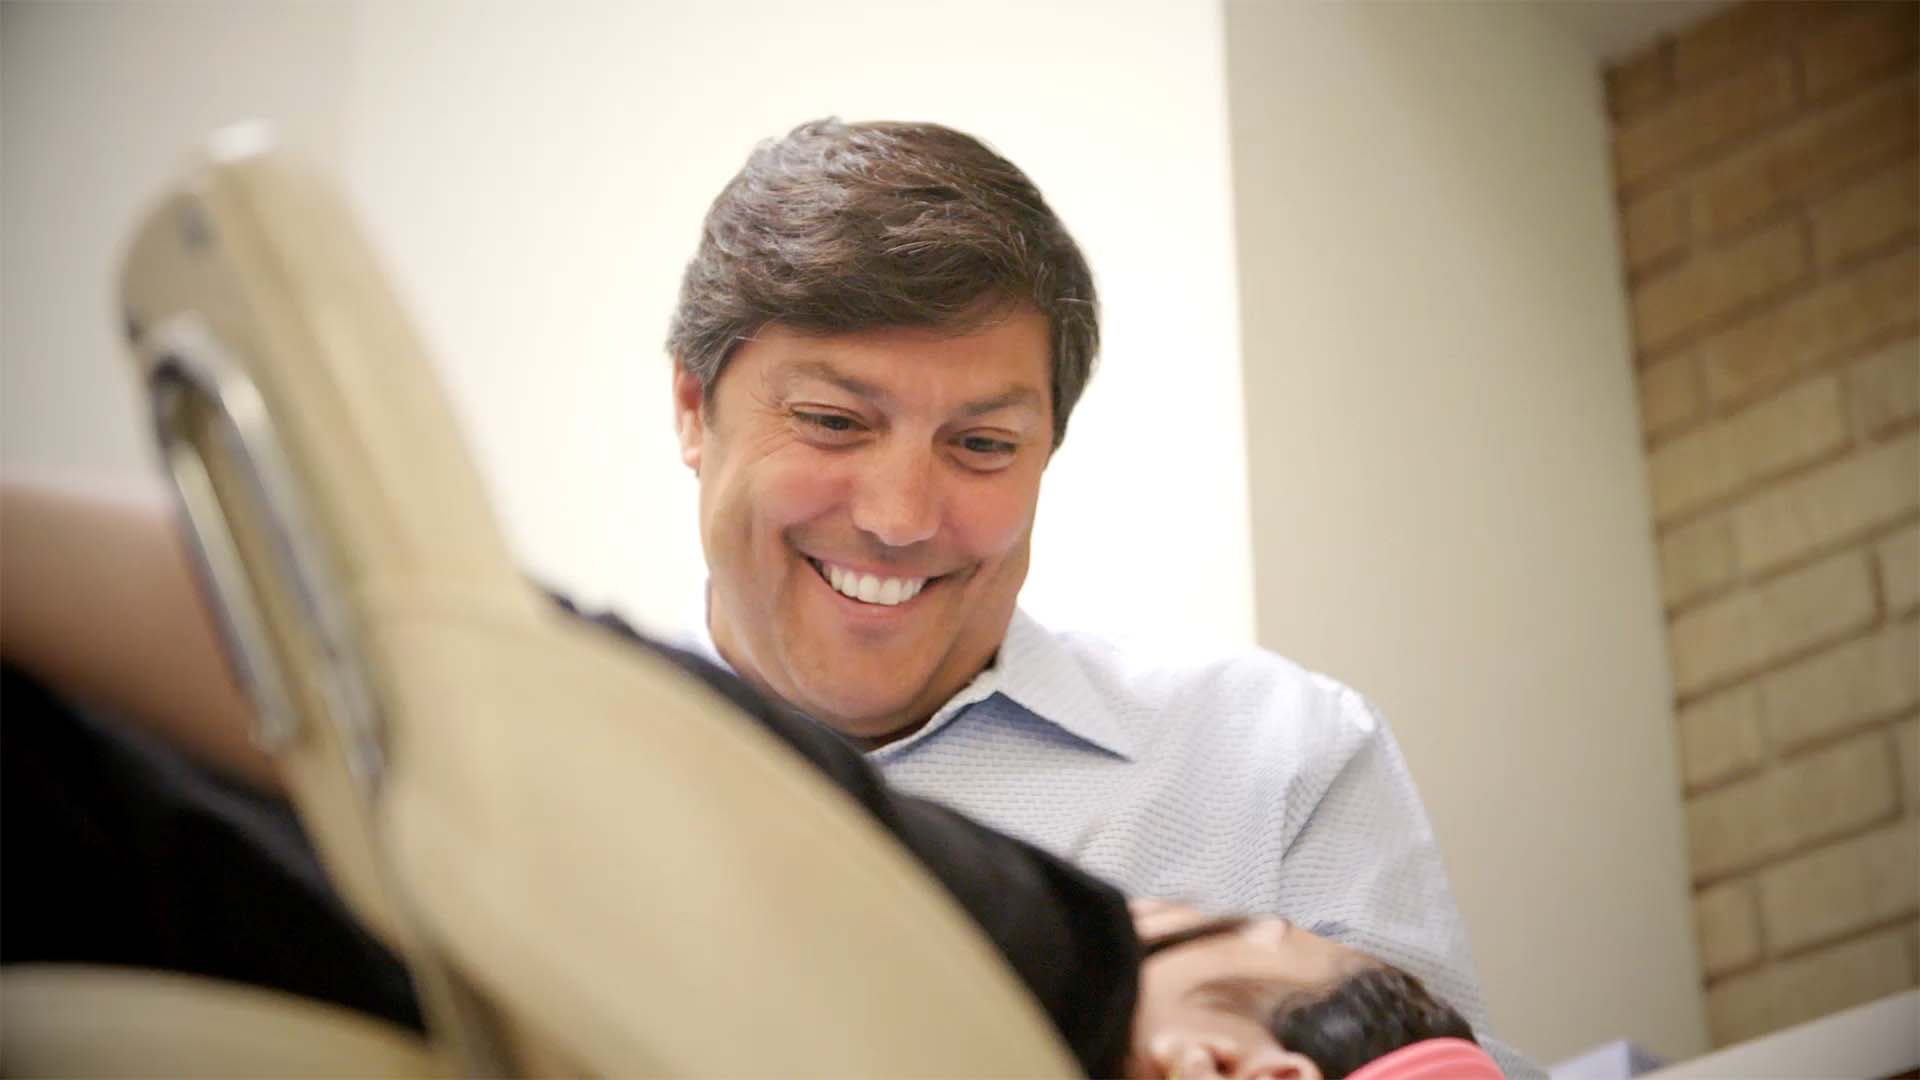 Dr Stefen Lippitz smiles while examining a patient from Kenilworth